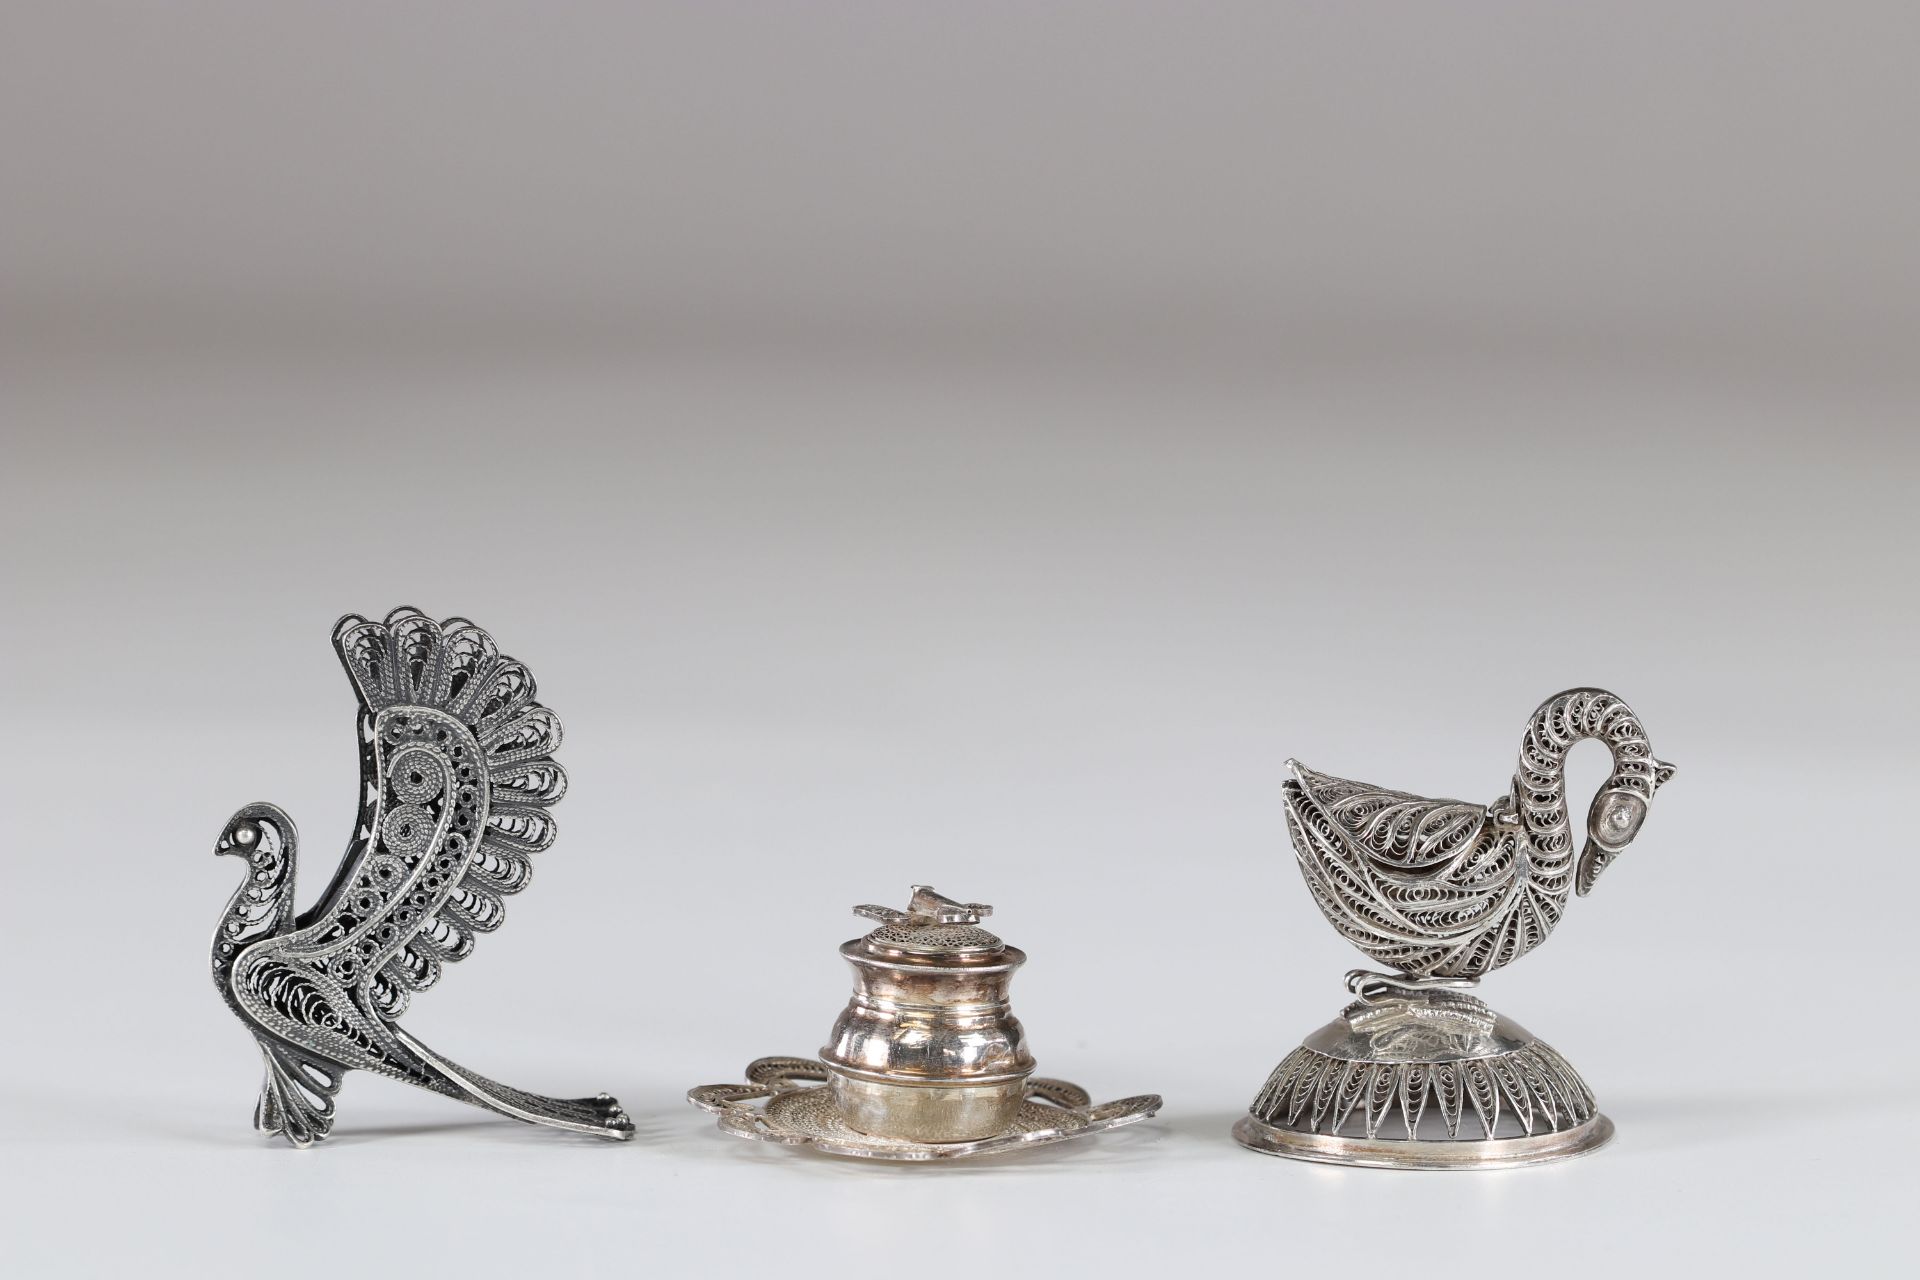 Lot of 3 silver filigree objects